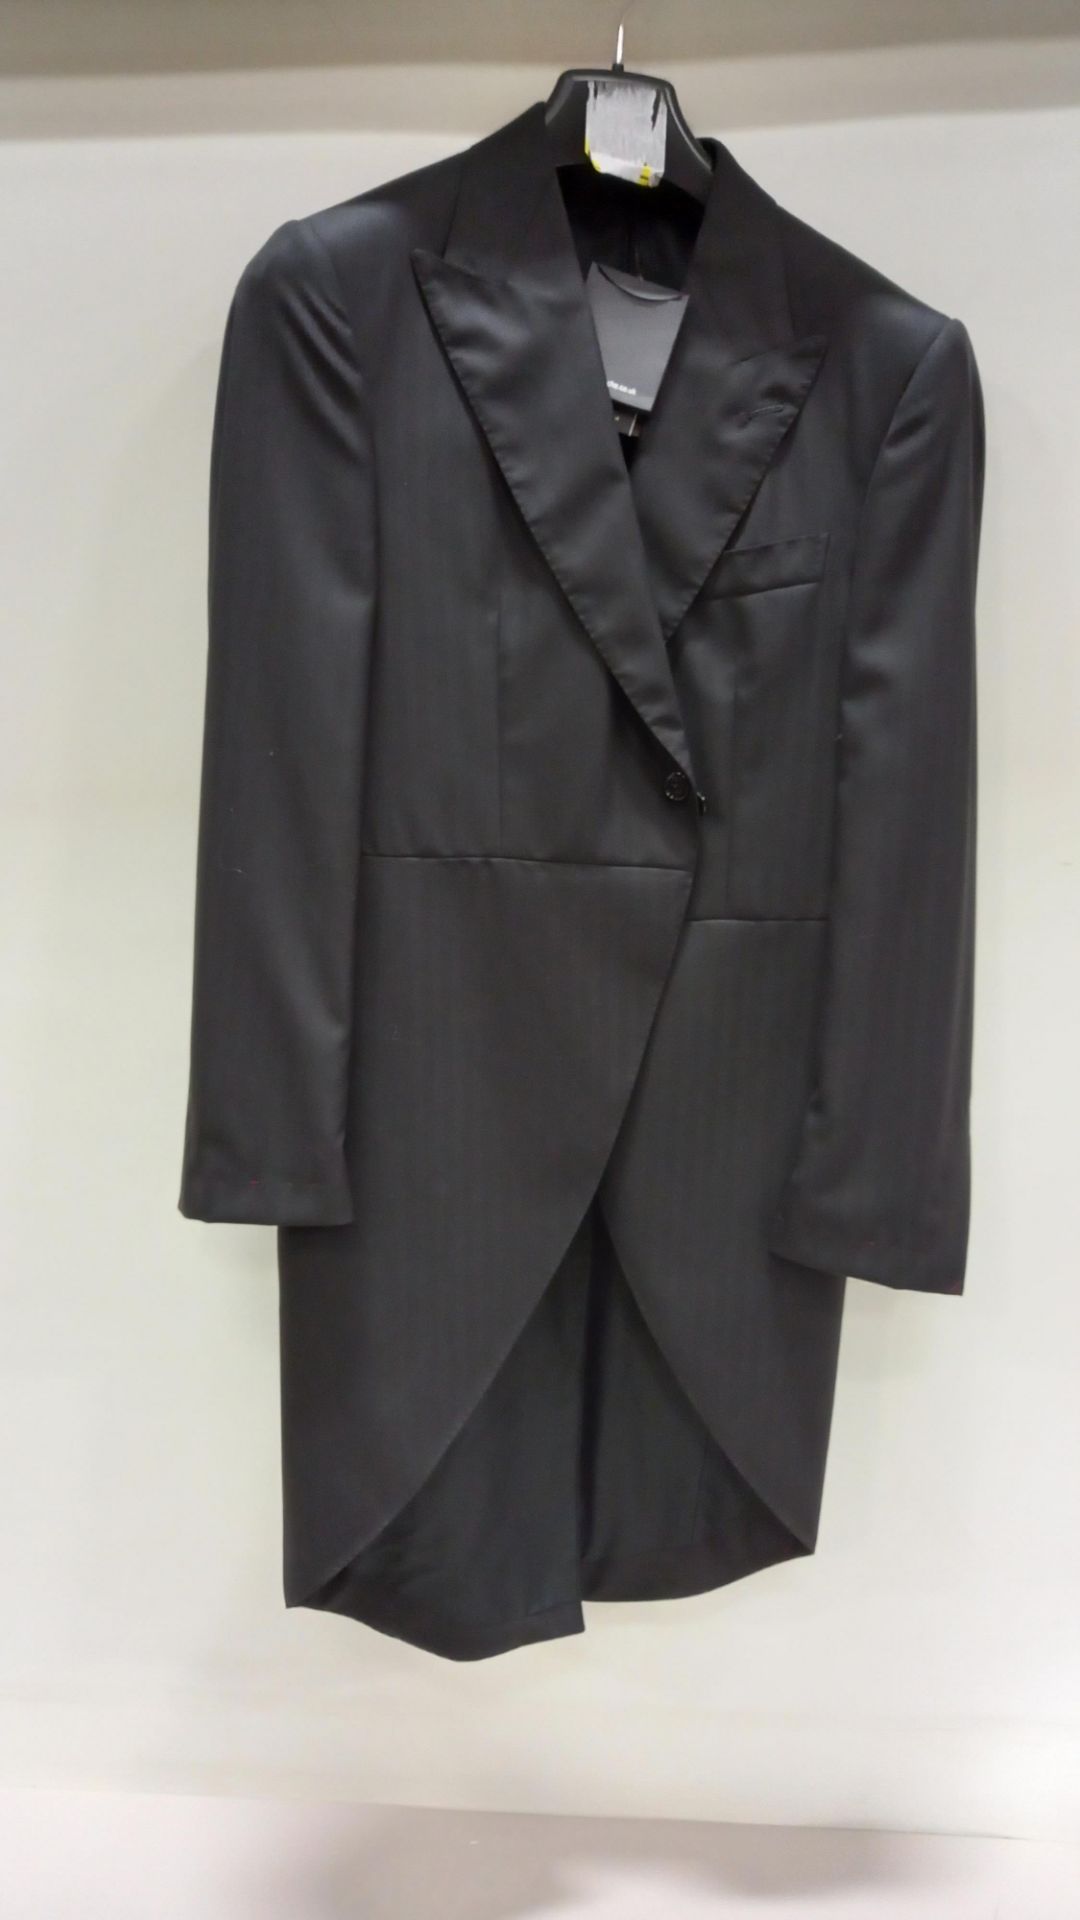 2 X BRAND NEW LUTWYCHE TAILORED BLACK TAILCOATS SIZE 48L,40R, (PLEASE NOTE NOT FULLY TAILORED)